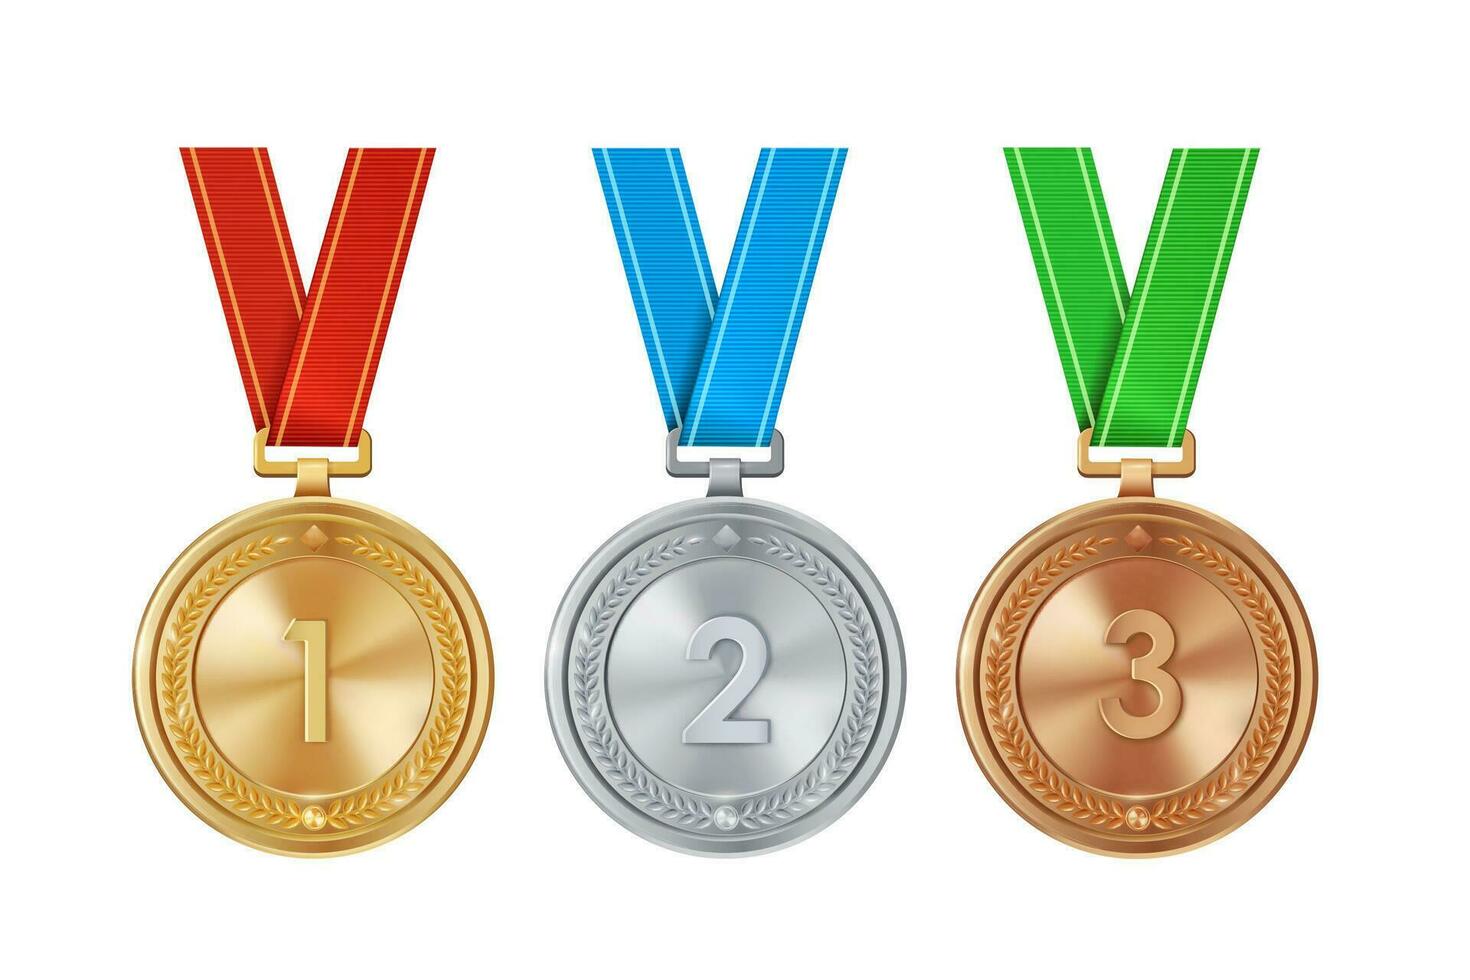 Realistic set of golden, silver, and bronze medals on colorful ribbons. Sports competition awards for 1st, 2nd, and 3rd place. Championship rewards for achievements and victories. vector